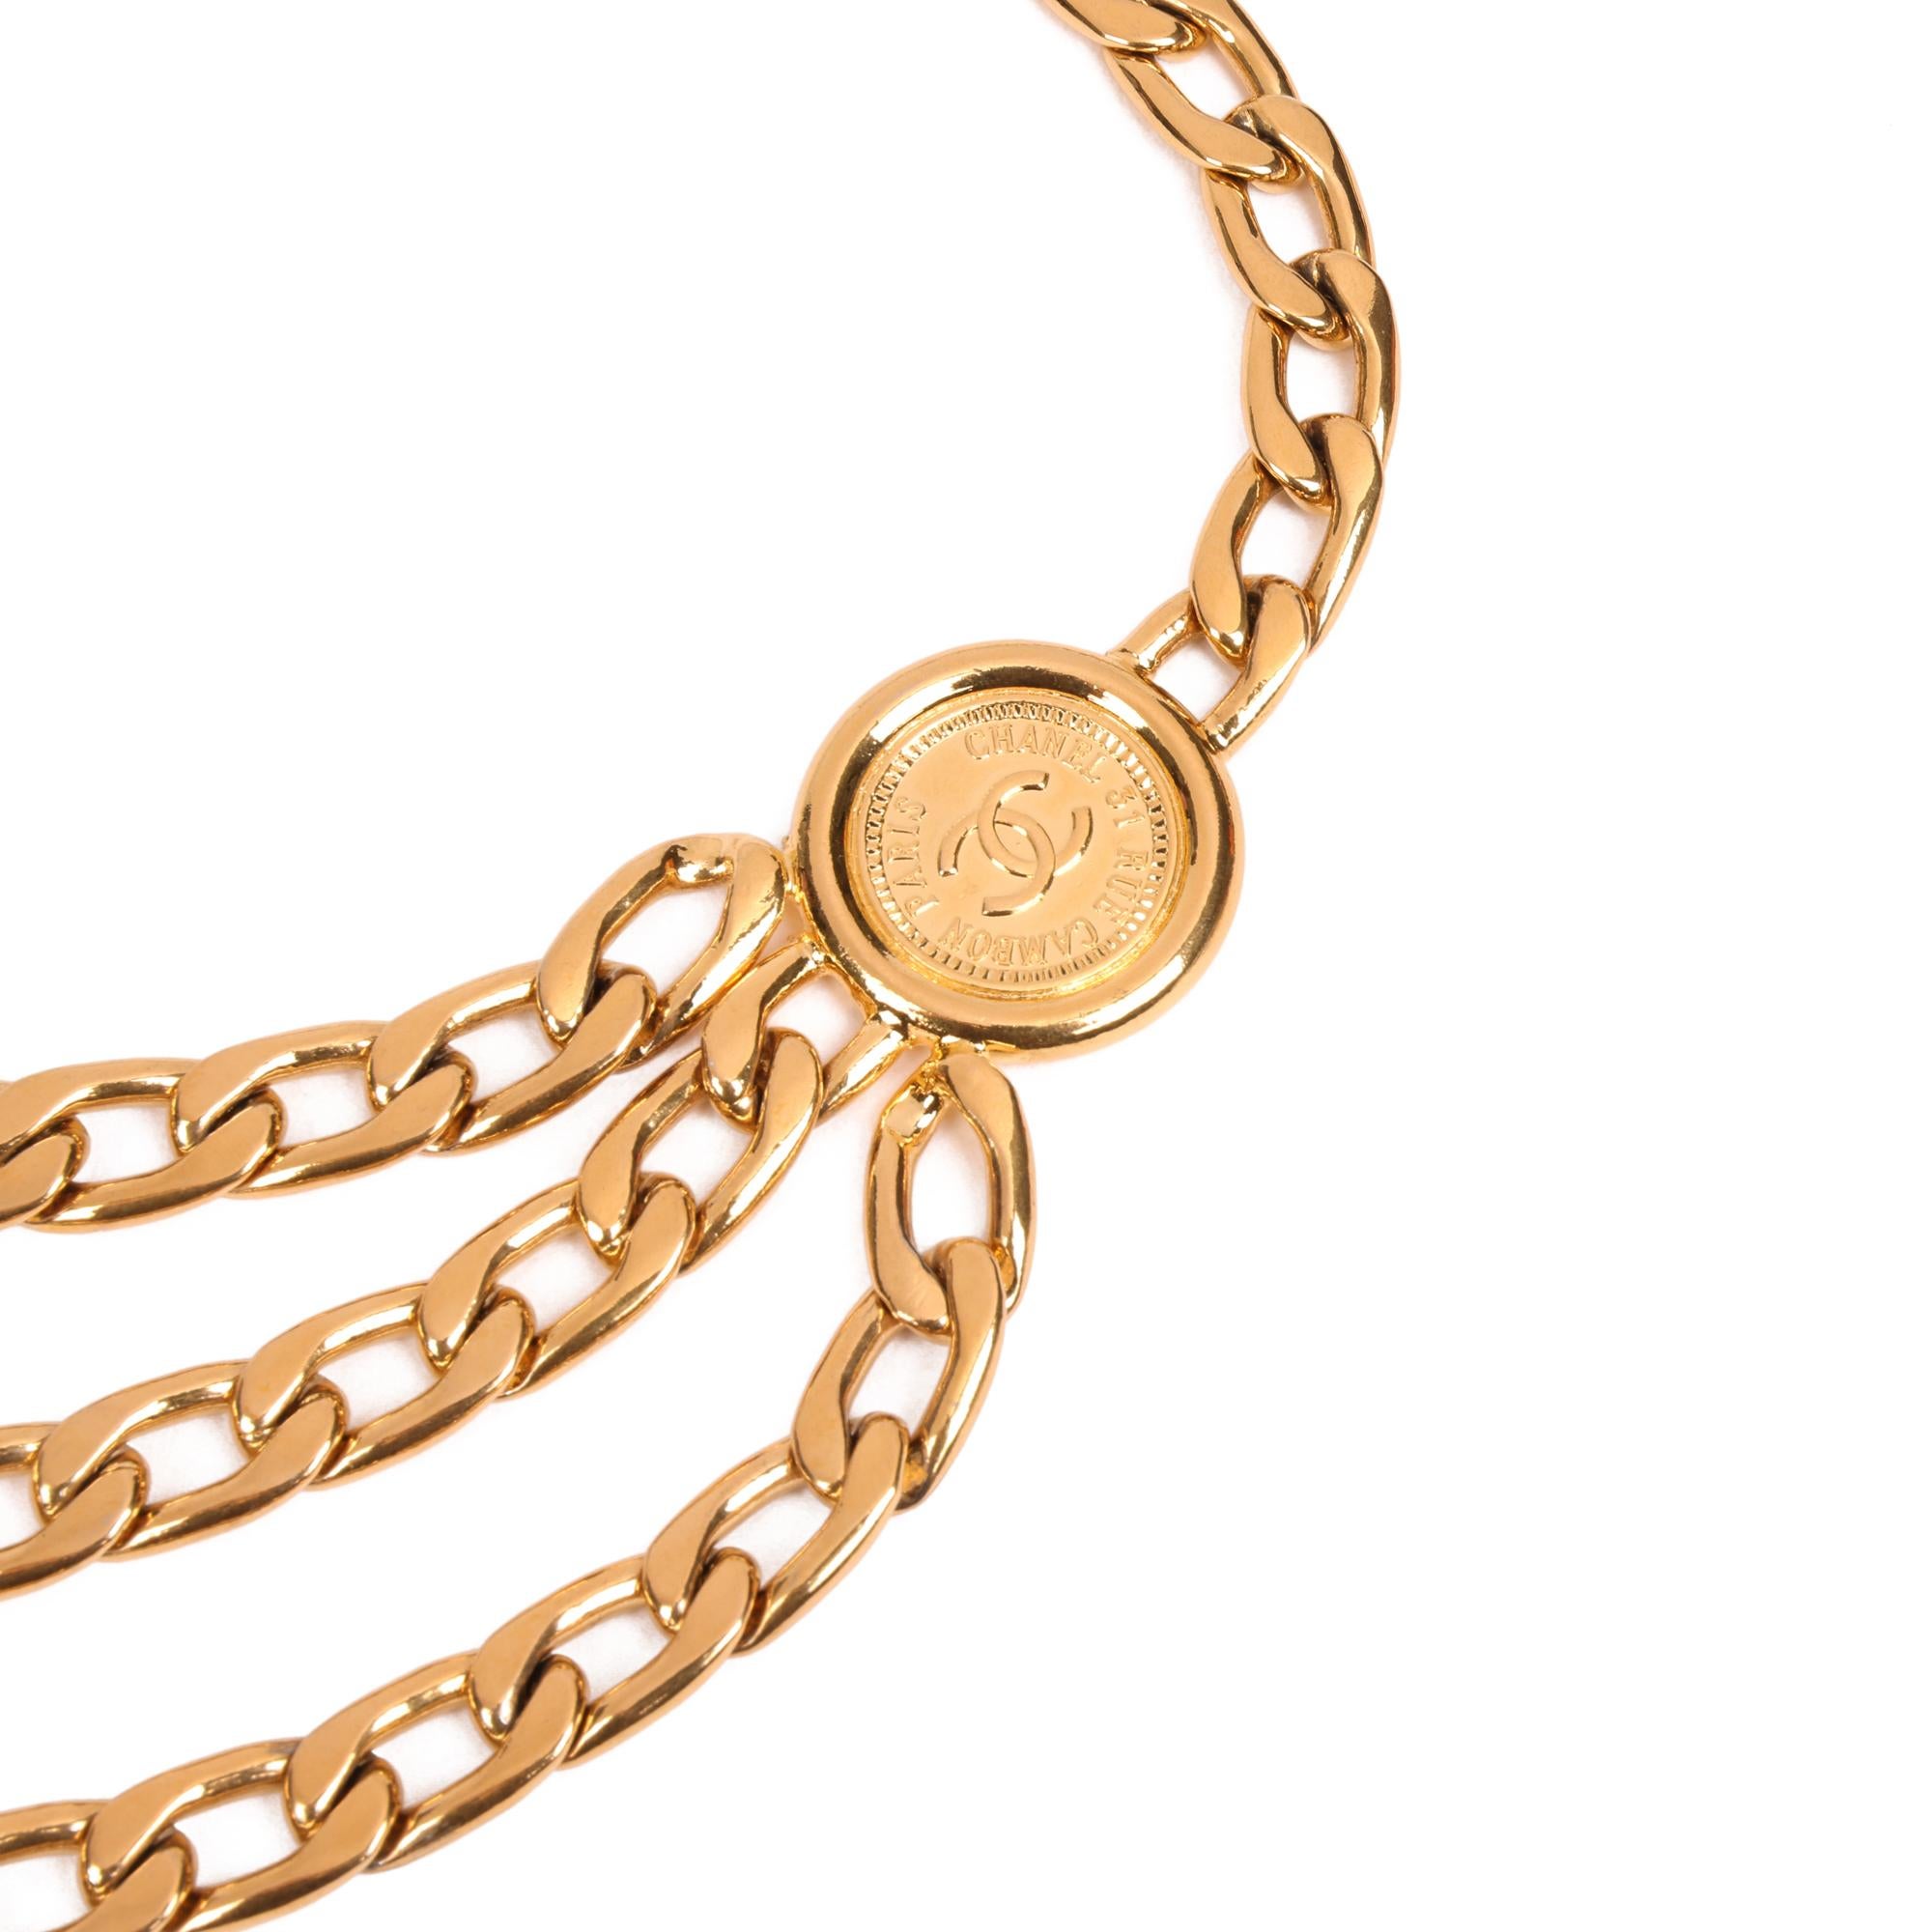 Chanel GOLD MEDALLION COIN VINTAGE TRIPLE CHAIN BELT

CONDITION NOTES
The hardware is in good condition with light signs of use. The Hardware shows slight signs of tarnishing.
Overall this item is in good pre-owned condition. Please note the